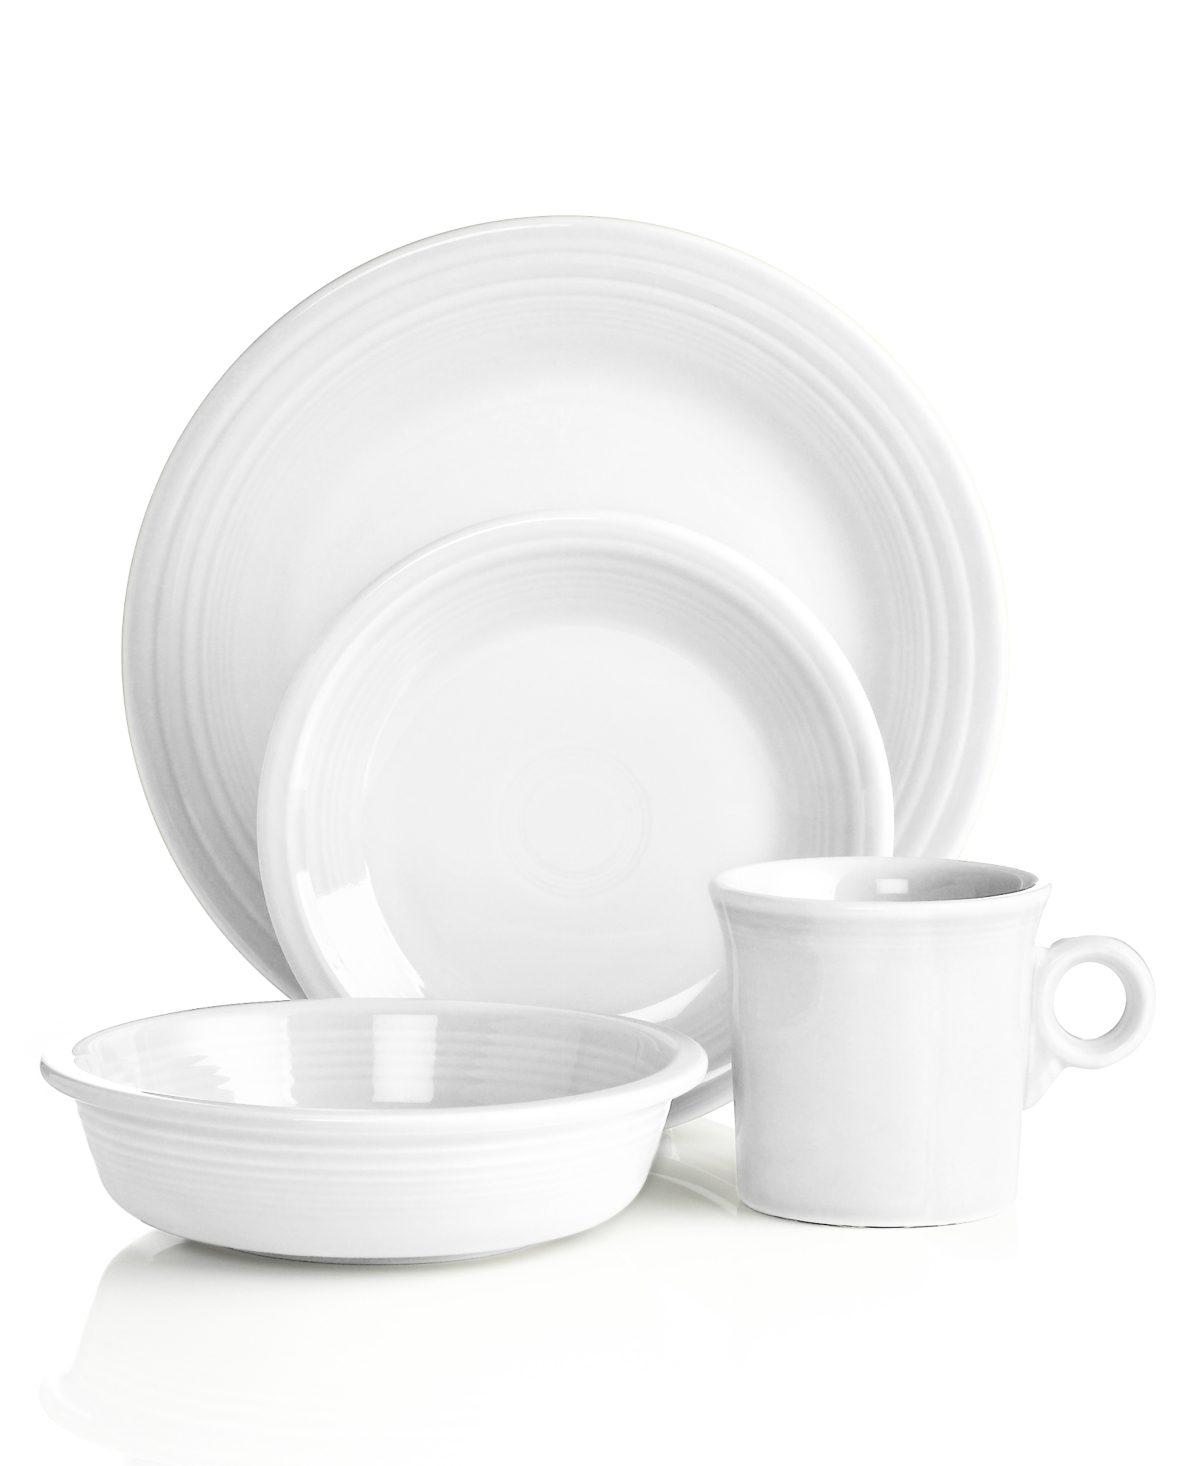 Fiesta 4-piece Place Setting In White